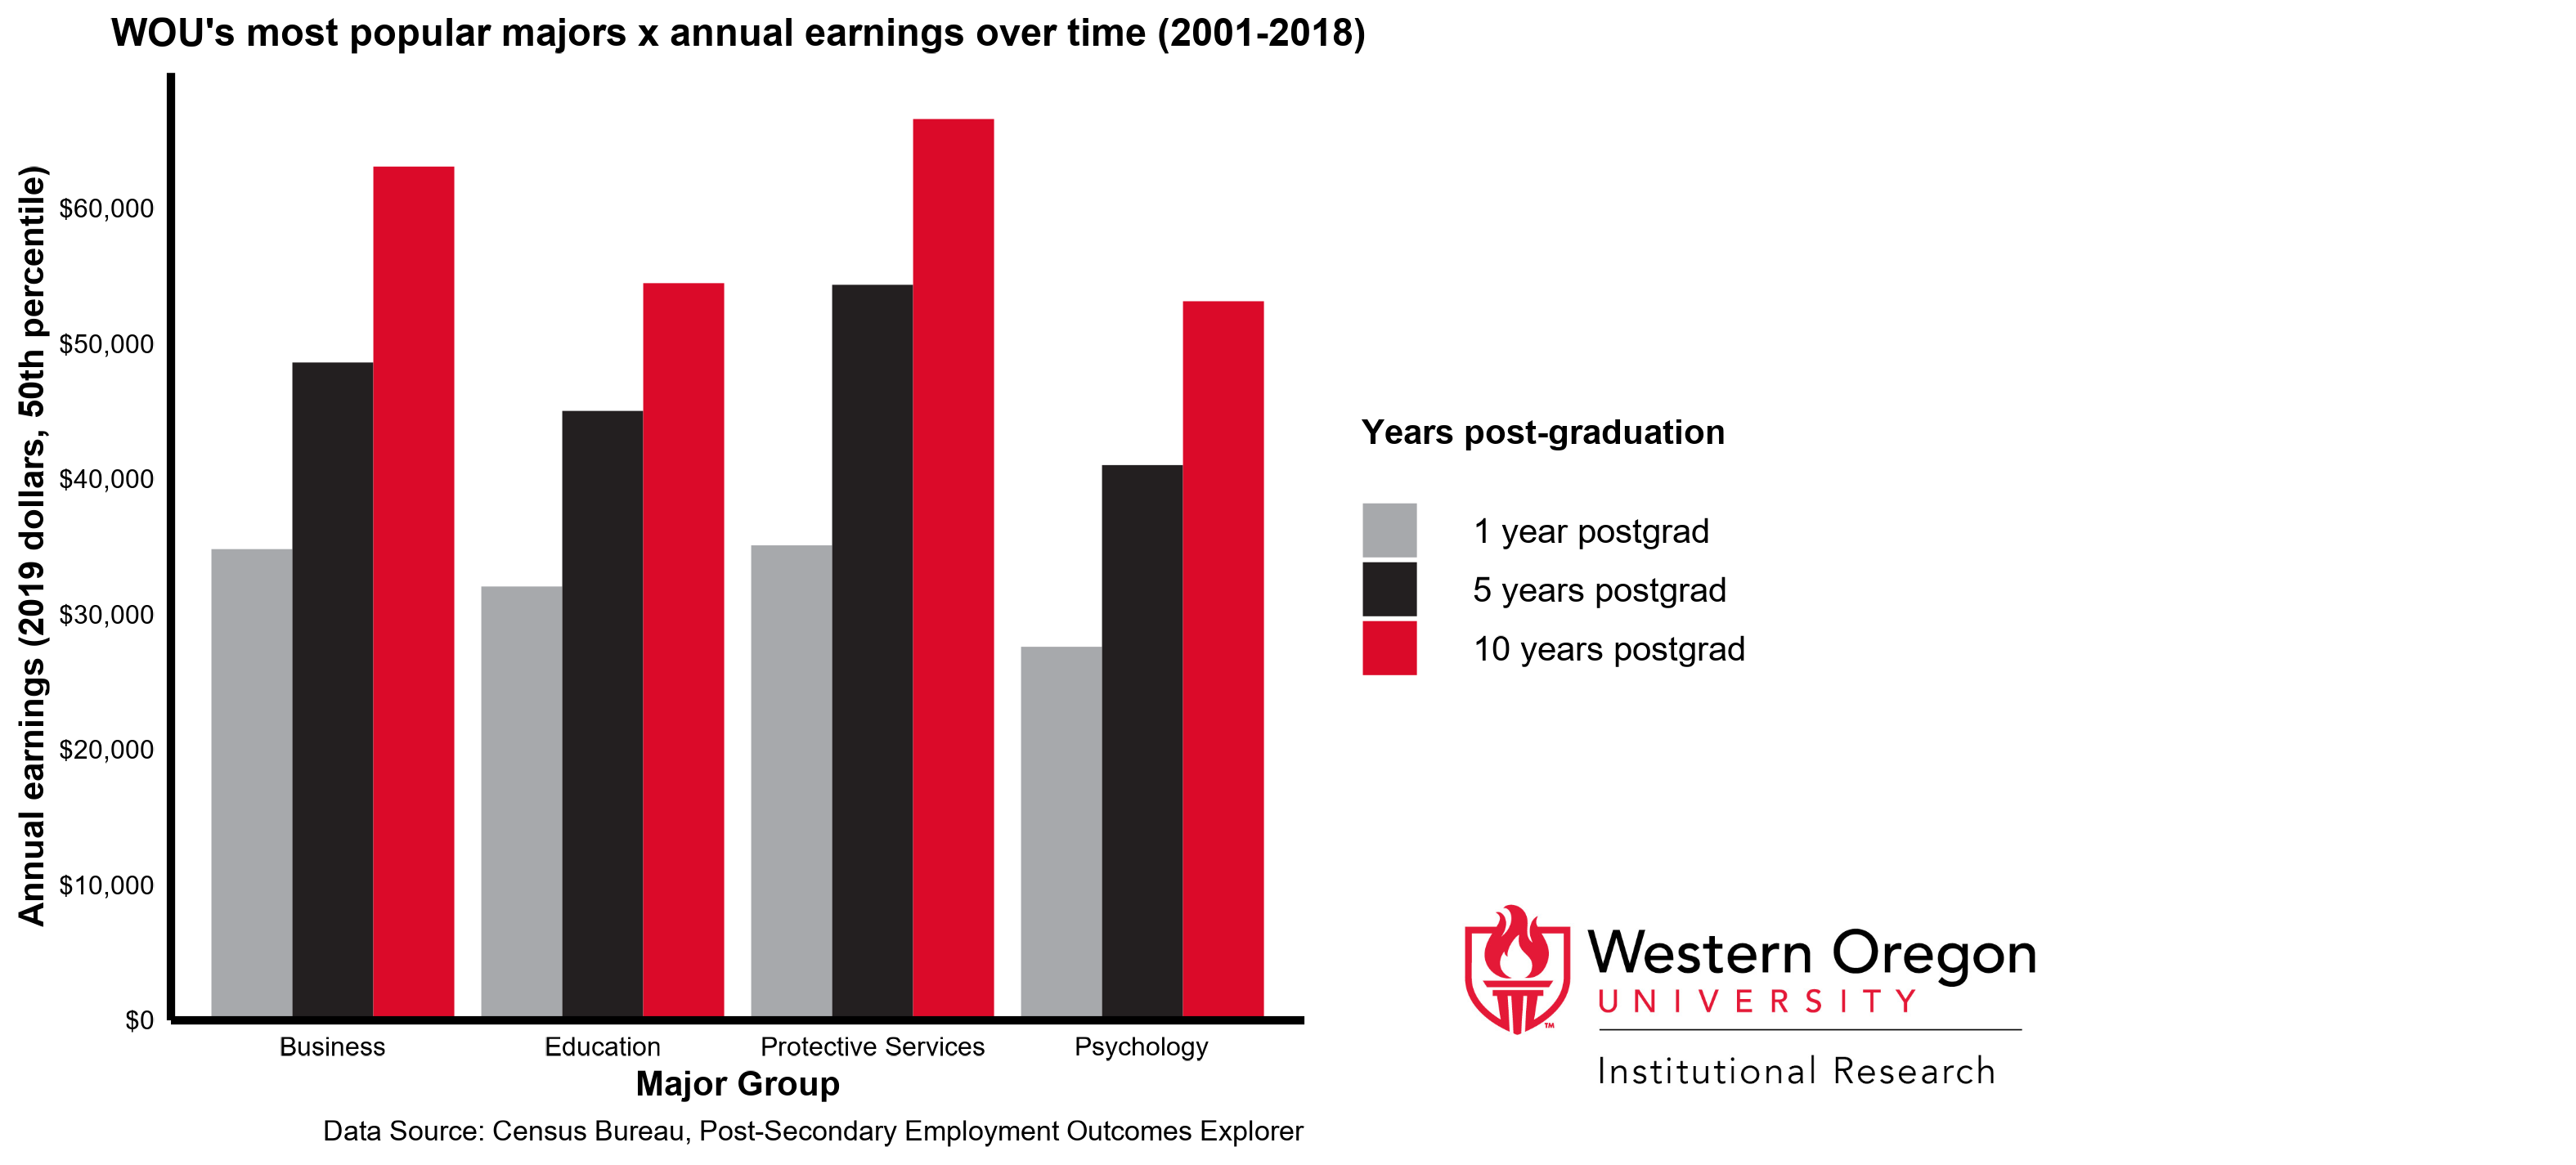 Bar chart of top 4 major groups at WOU and their annual earnings after graduation, showing that business and protective services majors earn more.